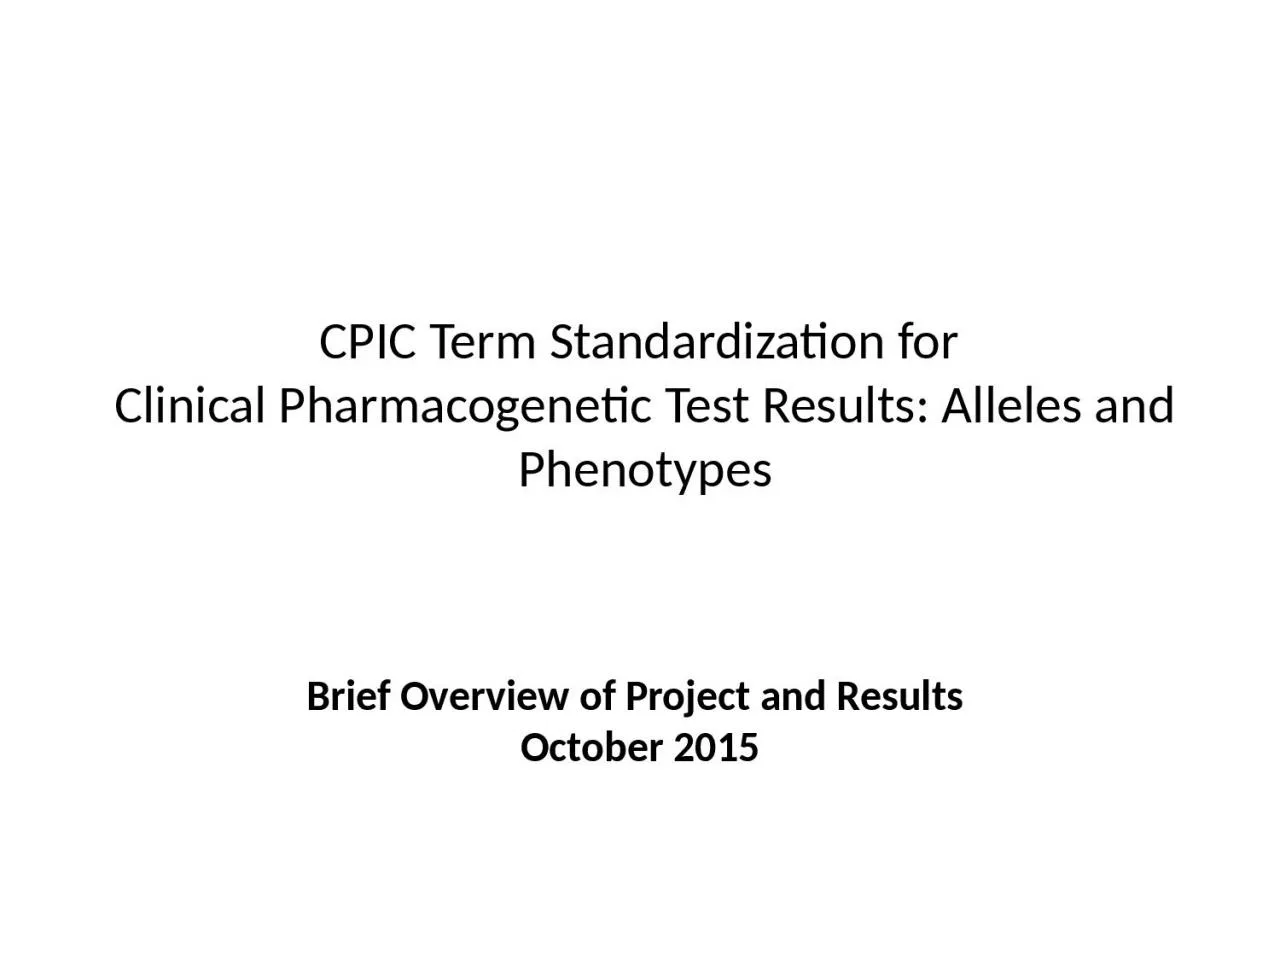 CPIC Term Standardization for